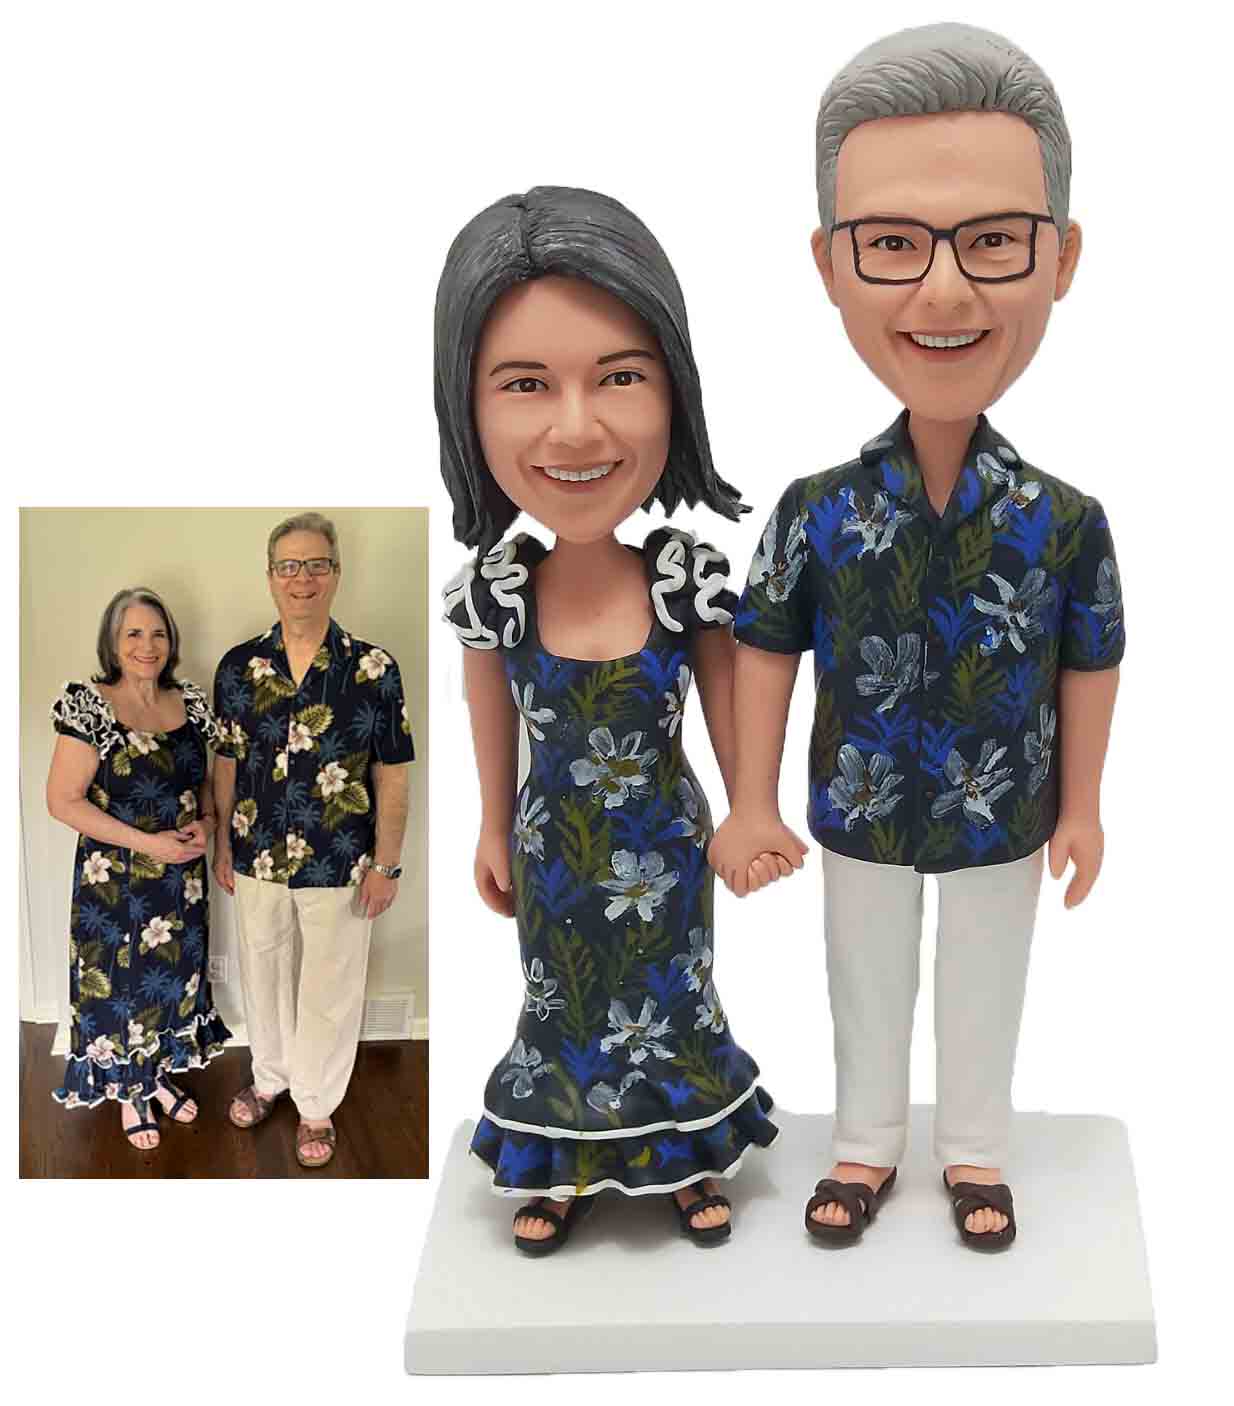 Create your own custom wedding cake topper from photo